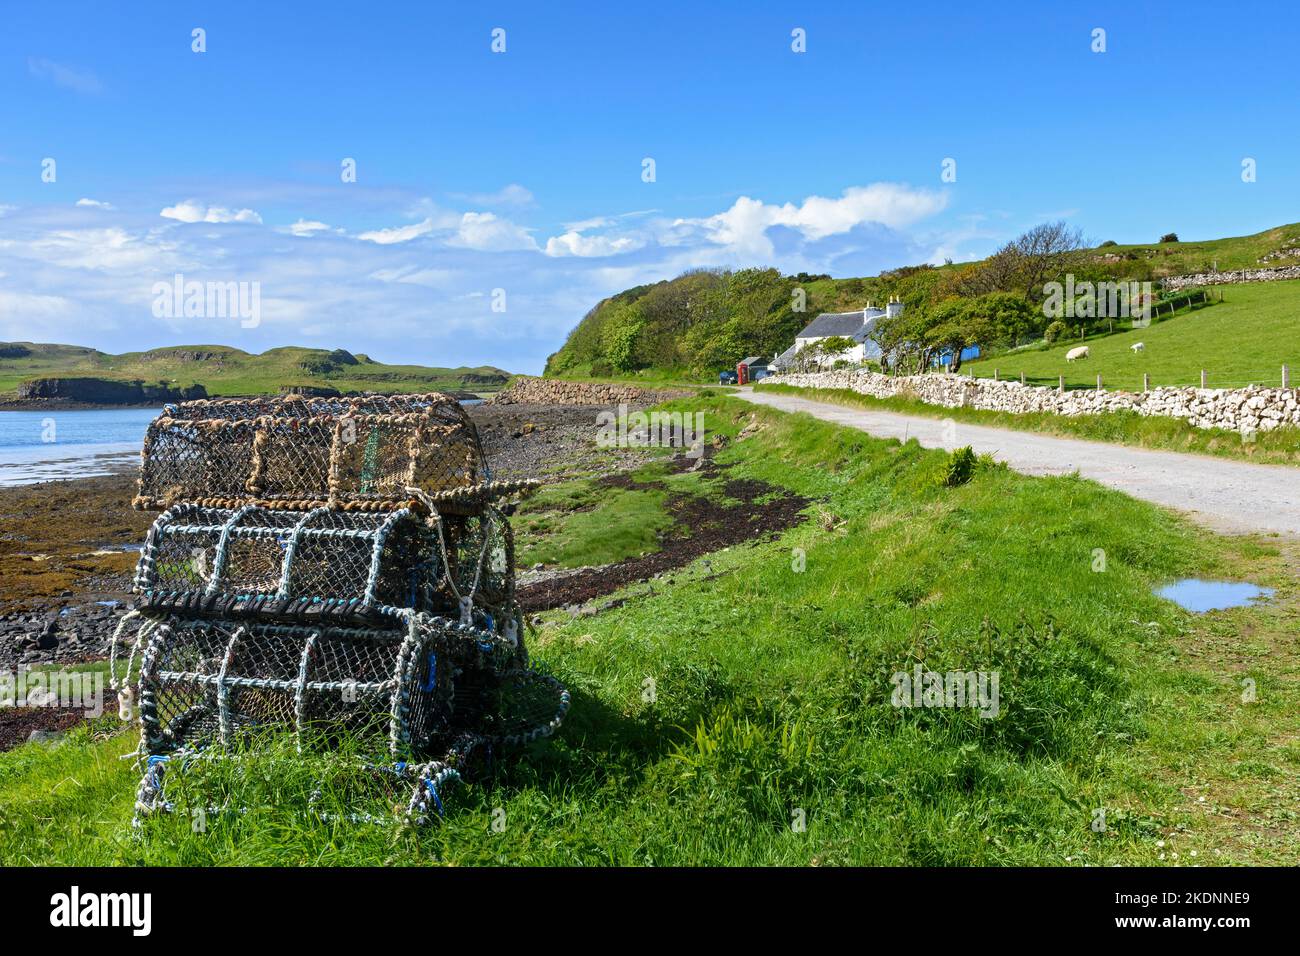 Lobster pots by the road near the village of A' Chill on the Isle of Canna, Scotland, UK Stock Photo